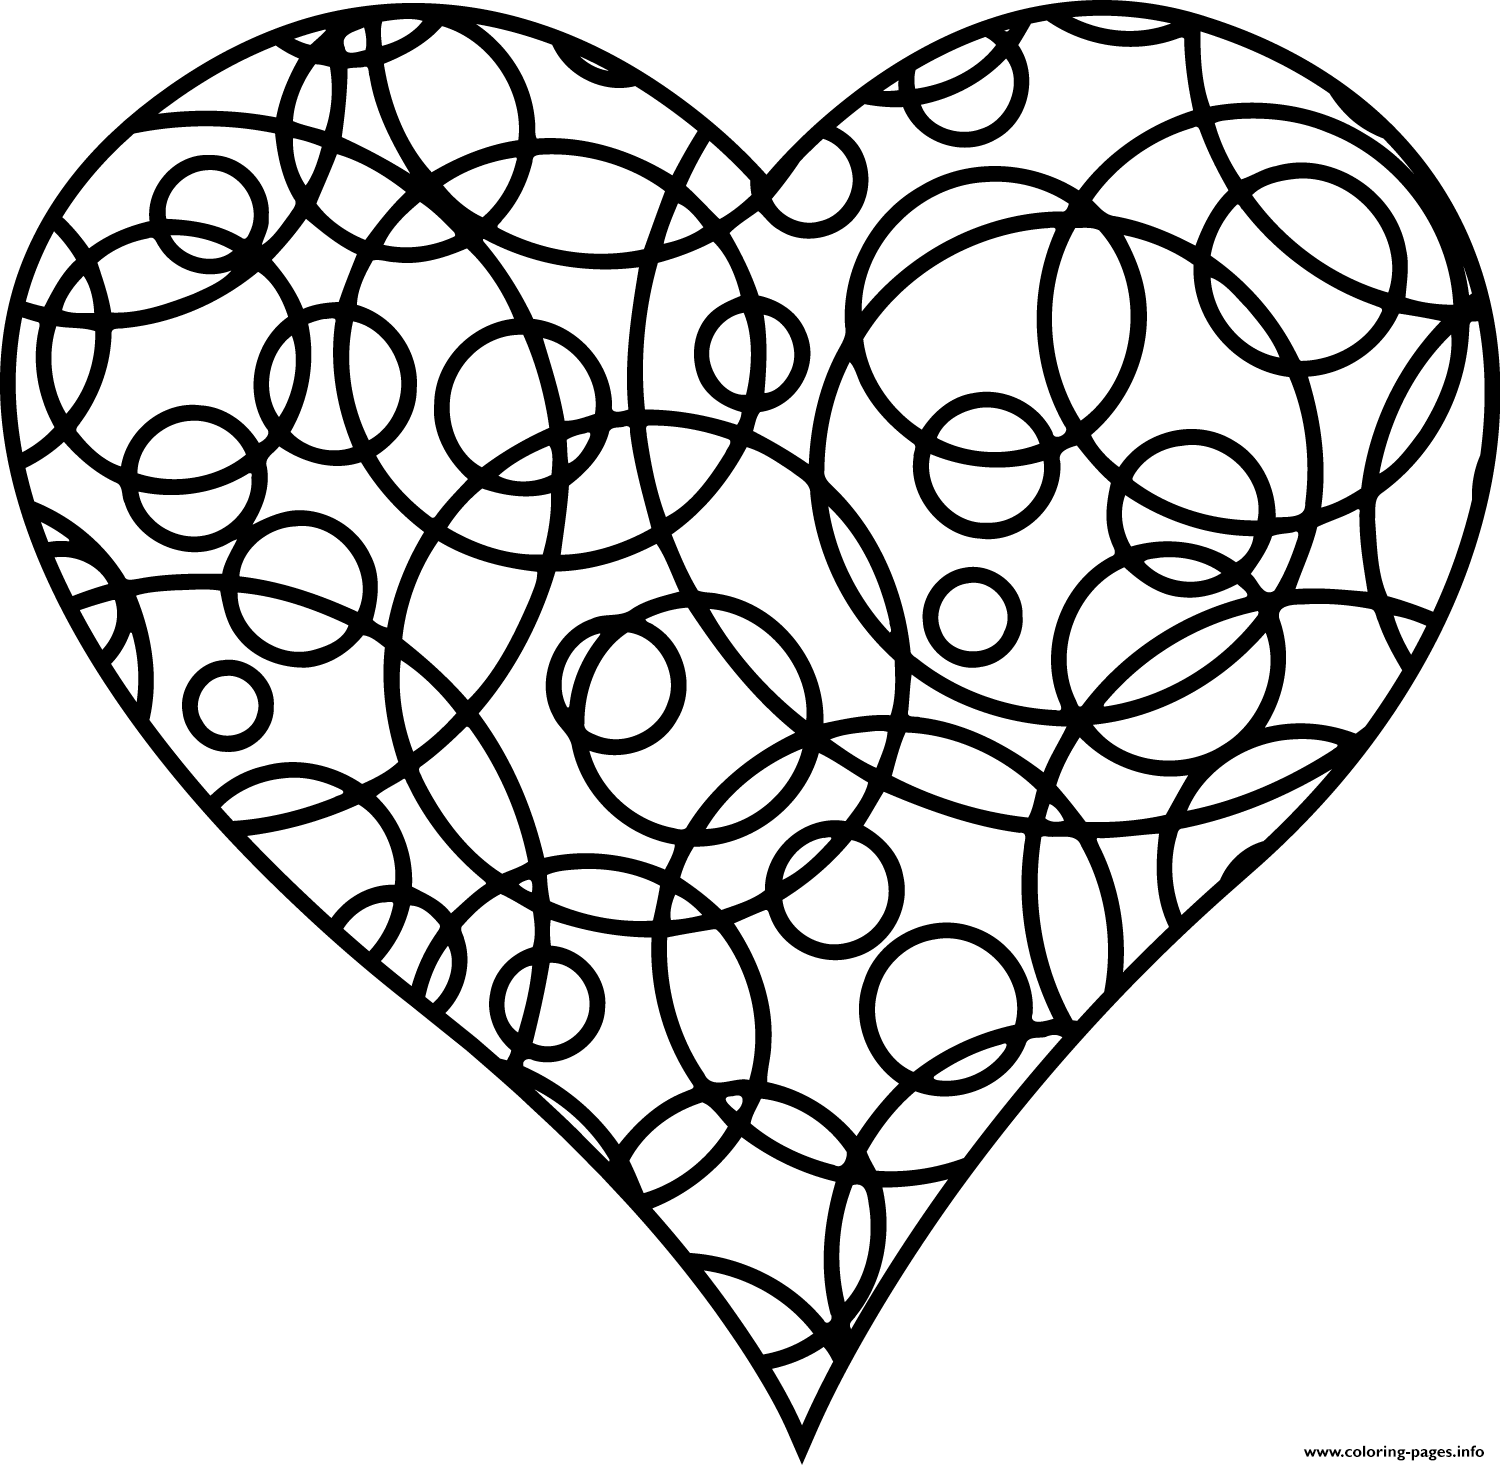 Patterned Heart For Love coloring